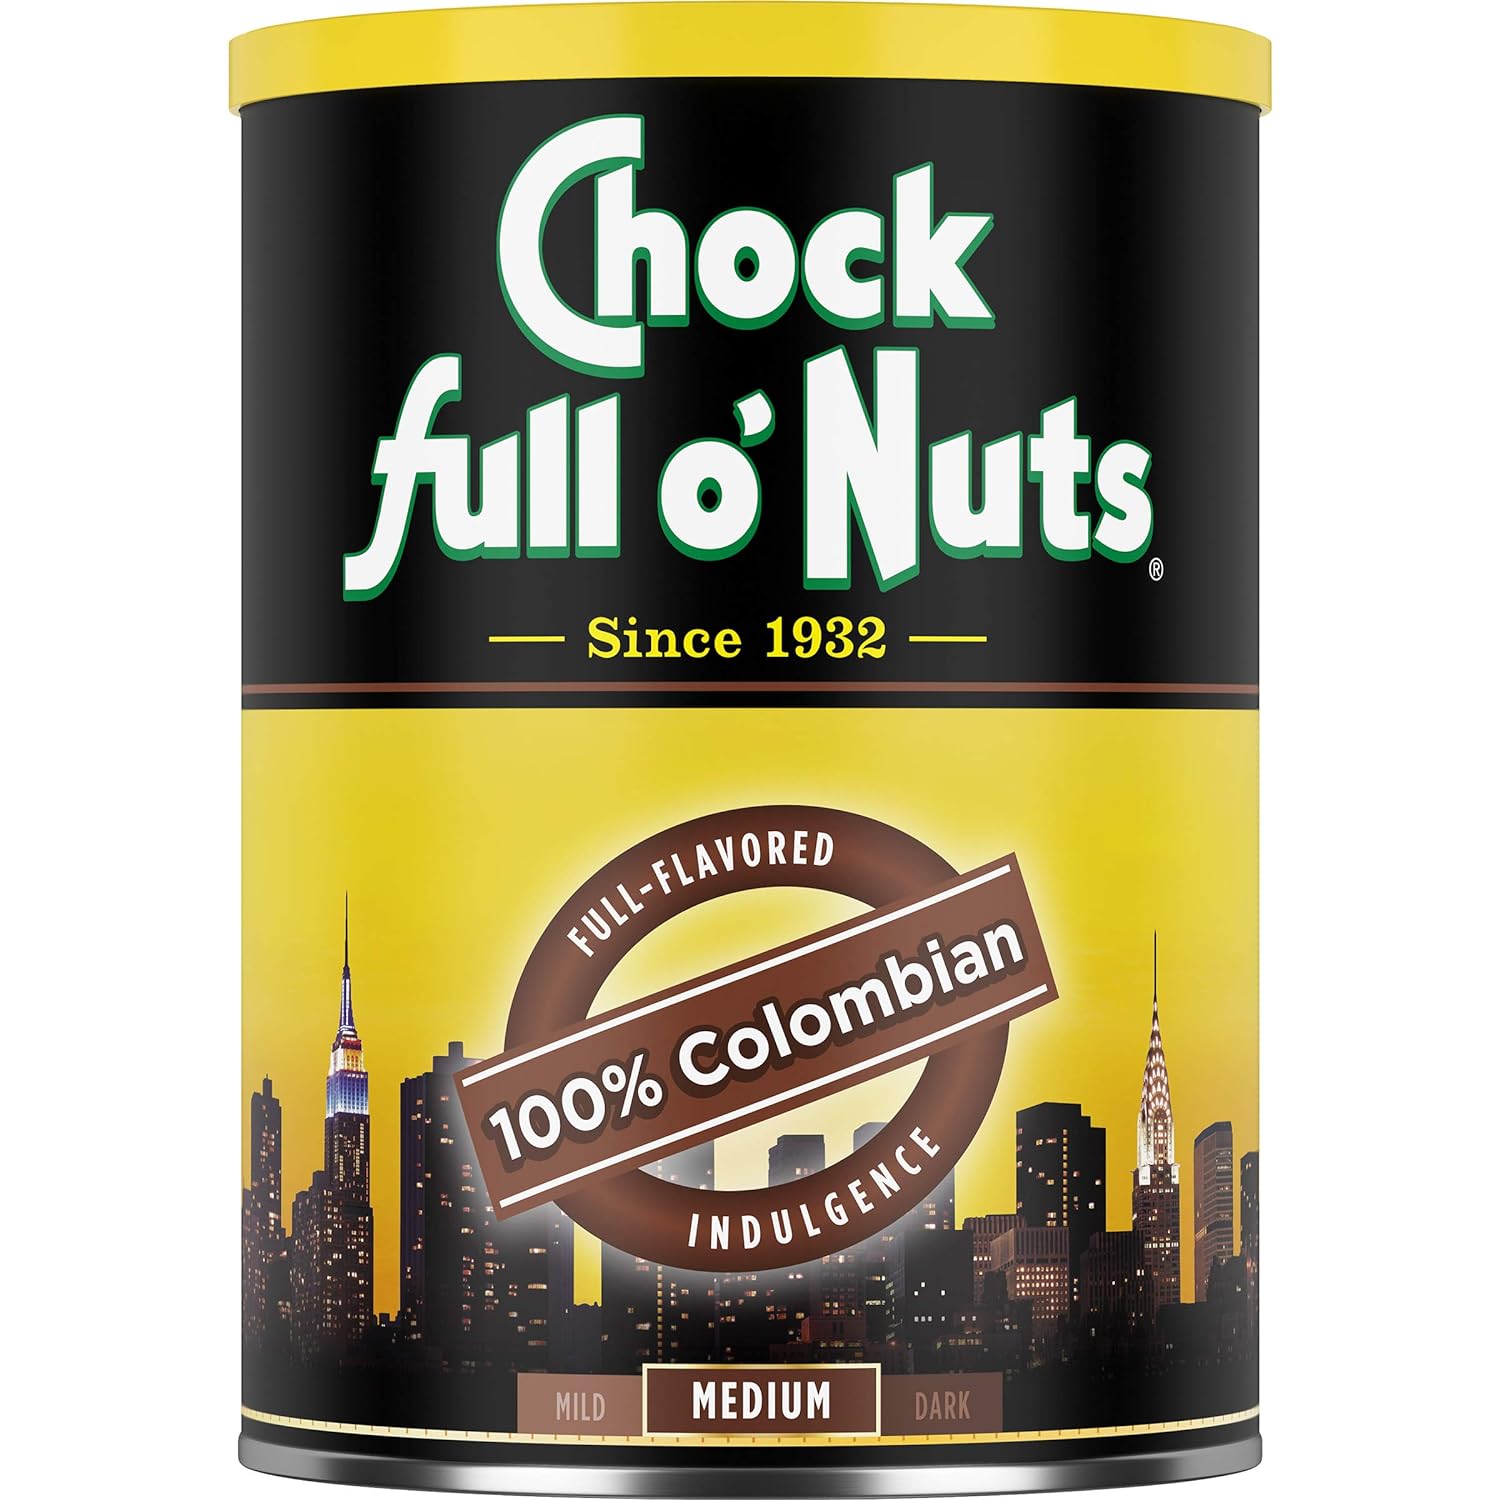 Chock Full o’Nuts 100% Colombian Ground Coffee, Medium Roast - Colombian Arabica Coffee – Rich, Full-Flavored, Aromatic and Smooth Medium-Dark Blend 1.5 Pound (Pack of 1)